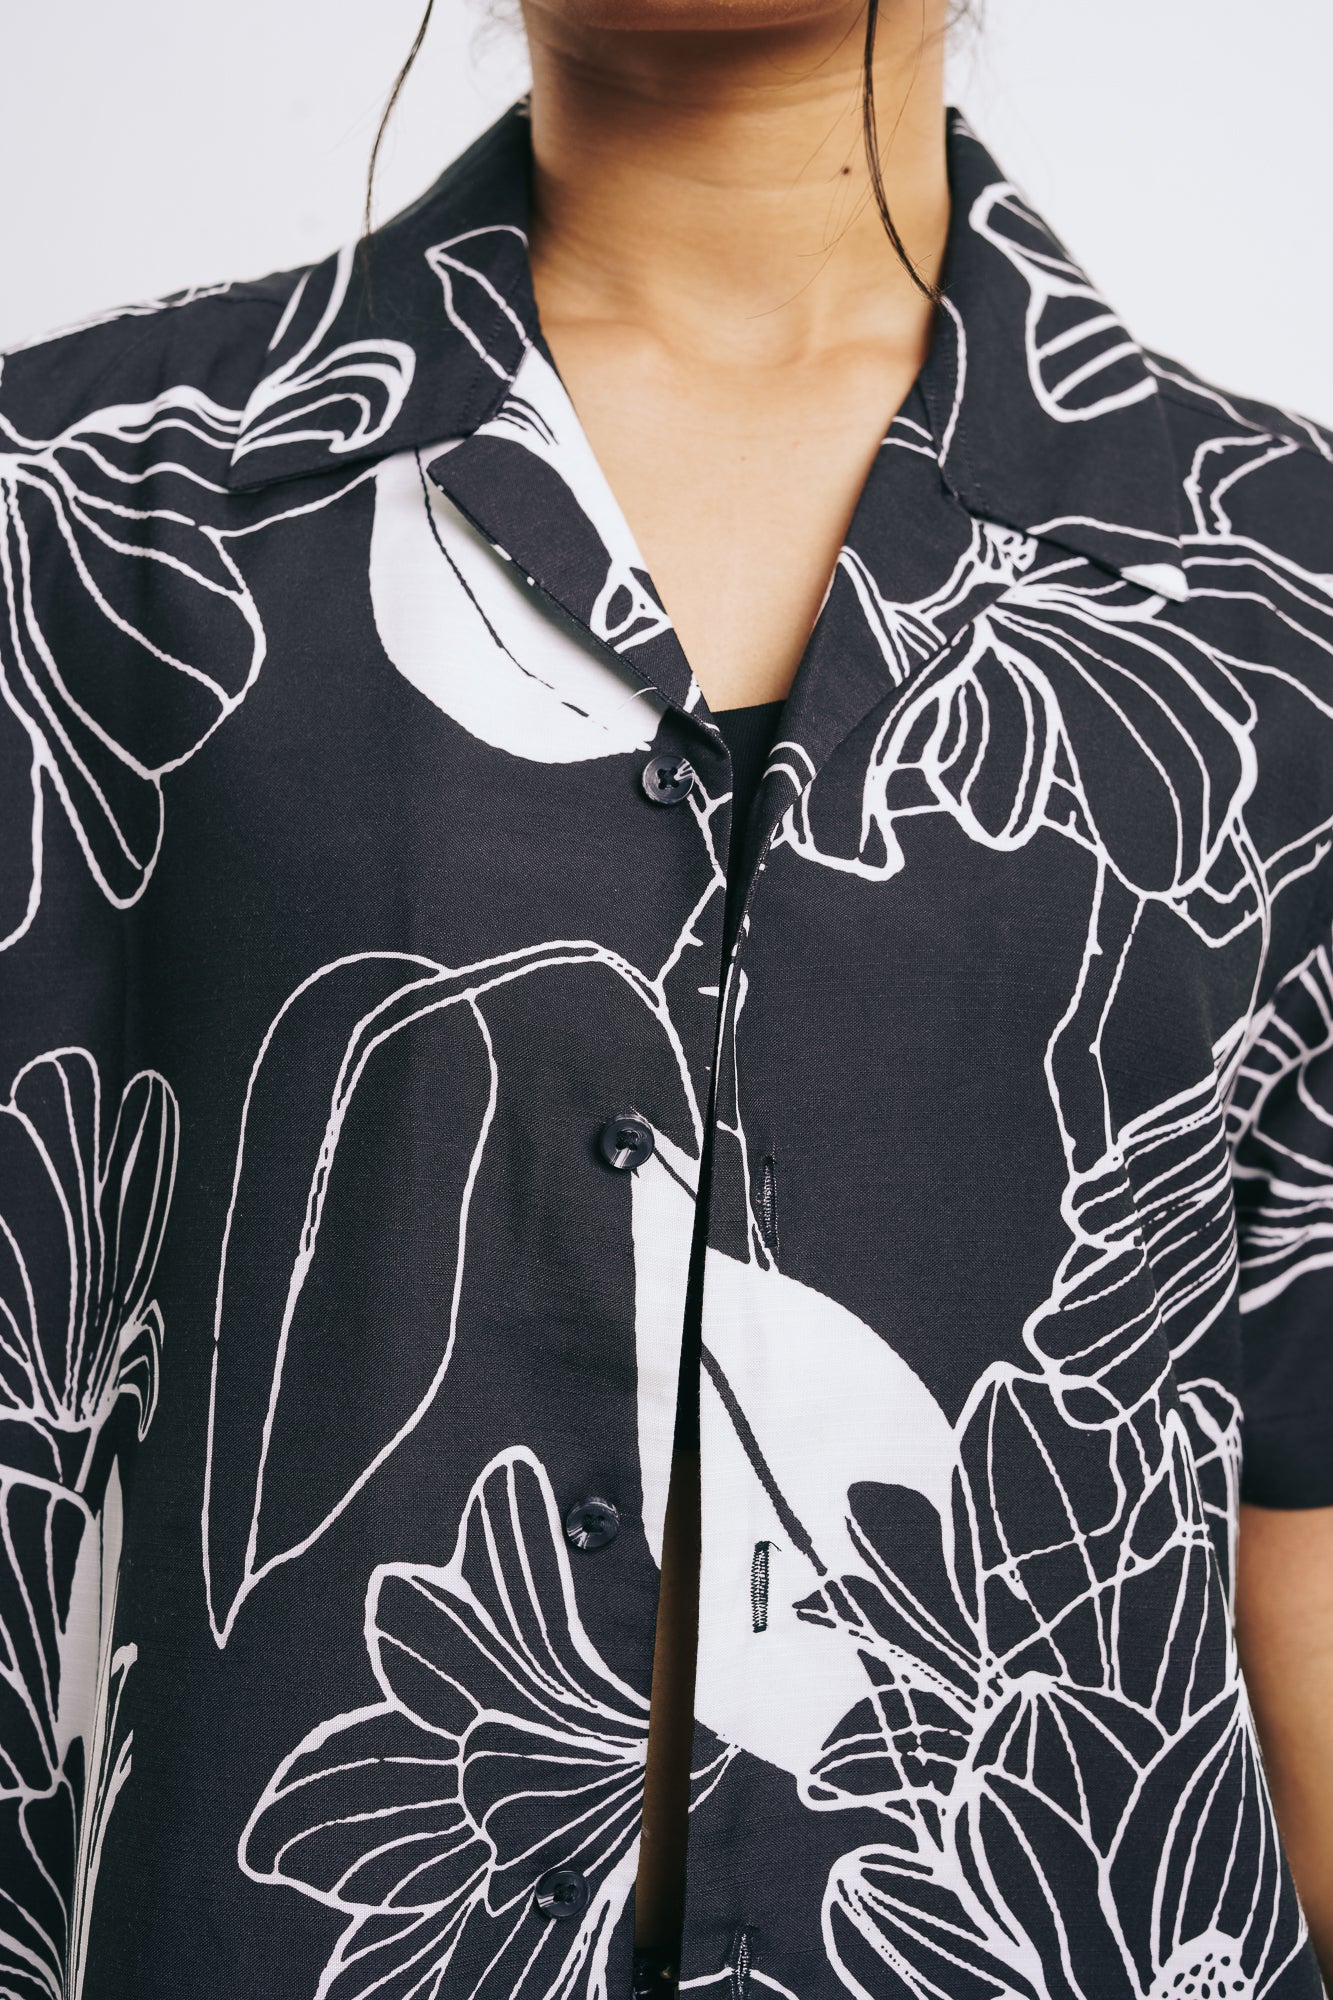 WOMEN'S ABSTRACT FLORAL SHIRT